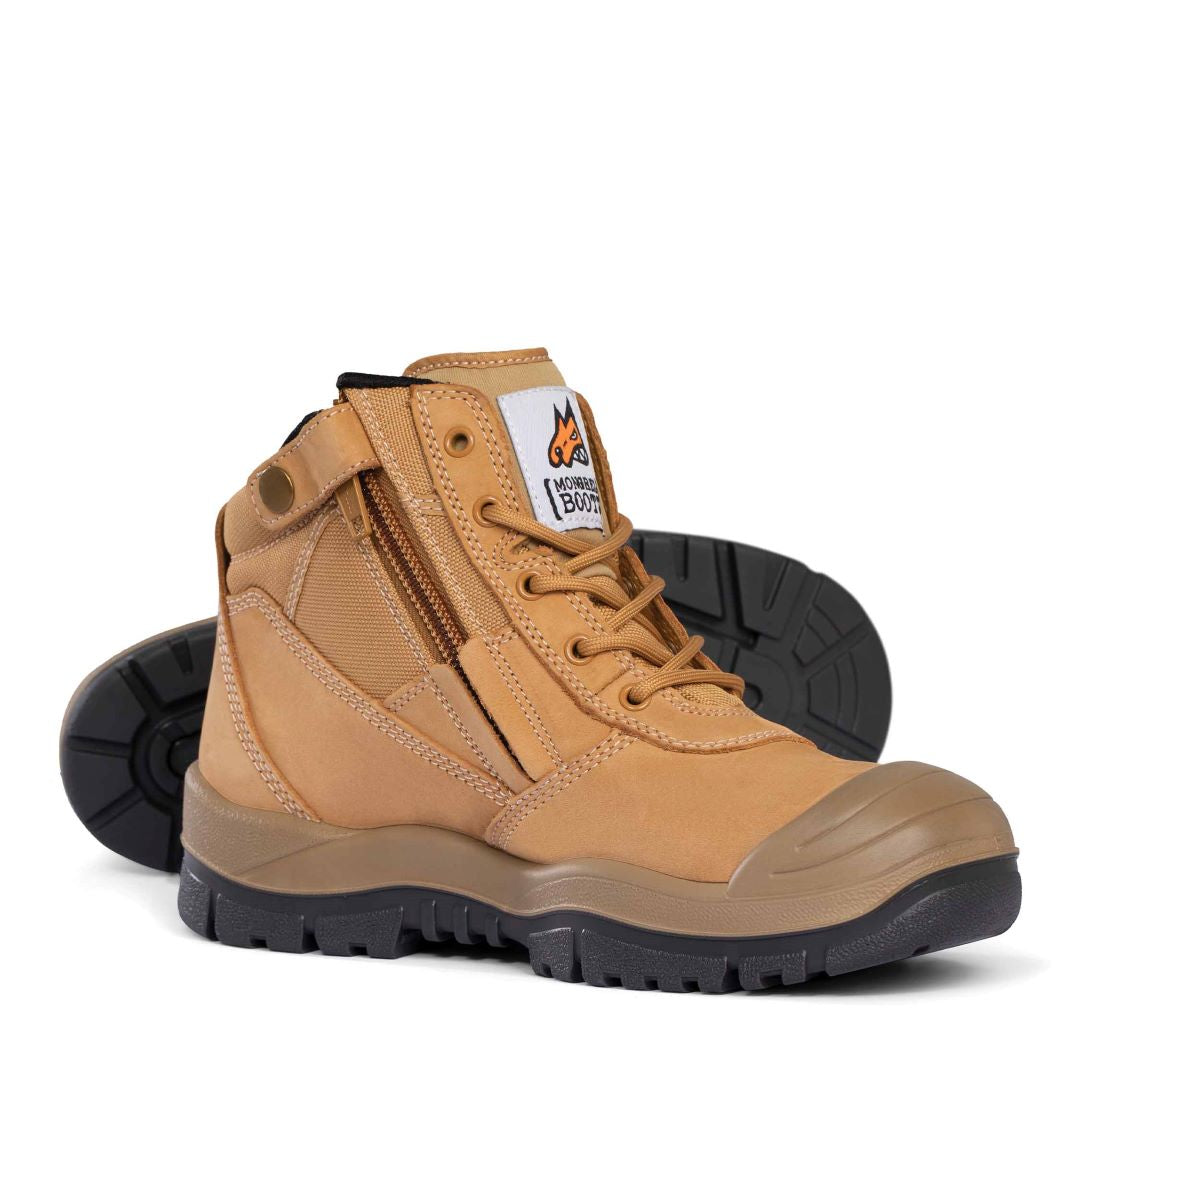 Mongrel ZipSider Boot with Scuff Cap